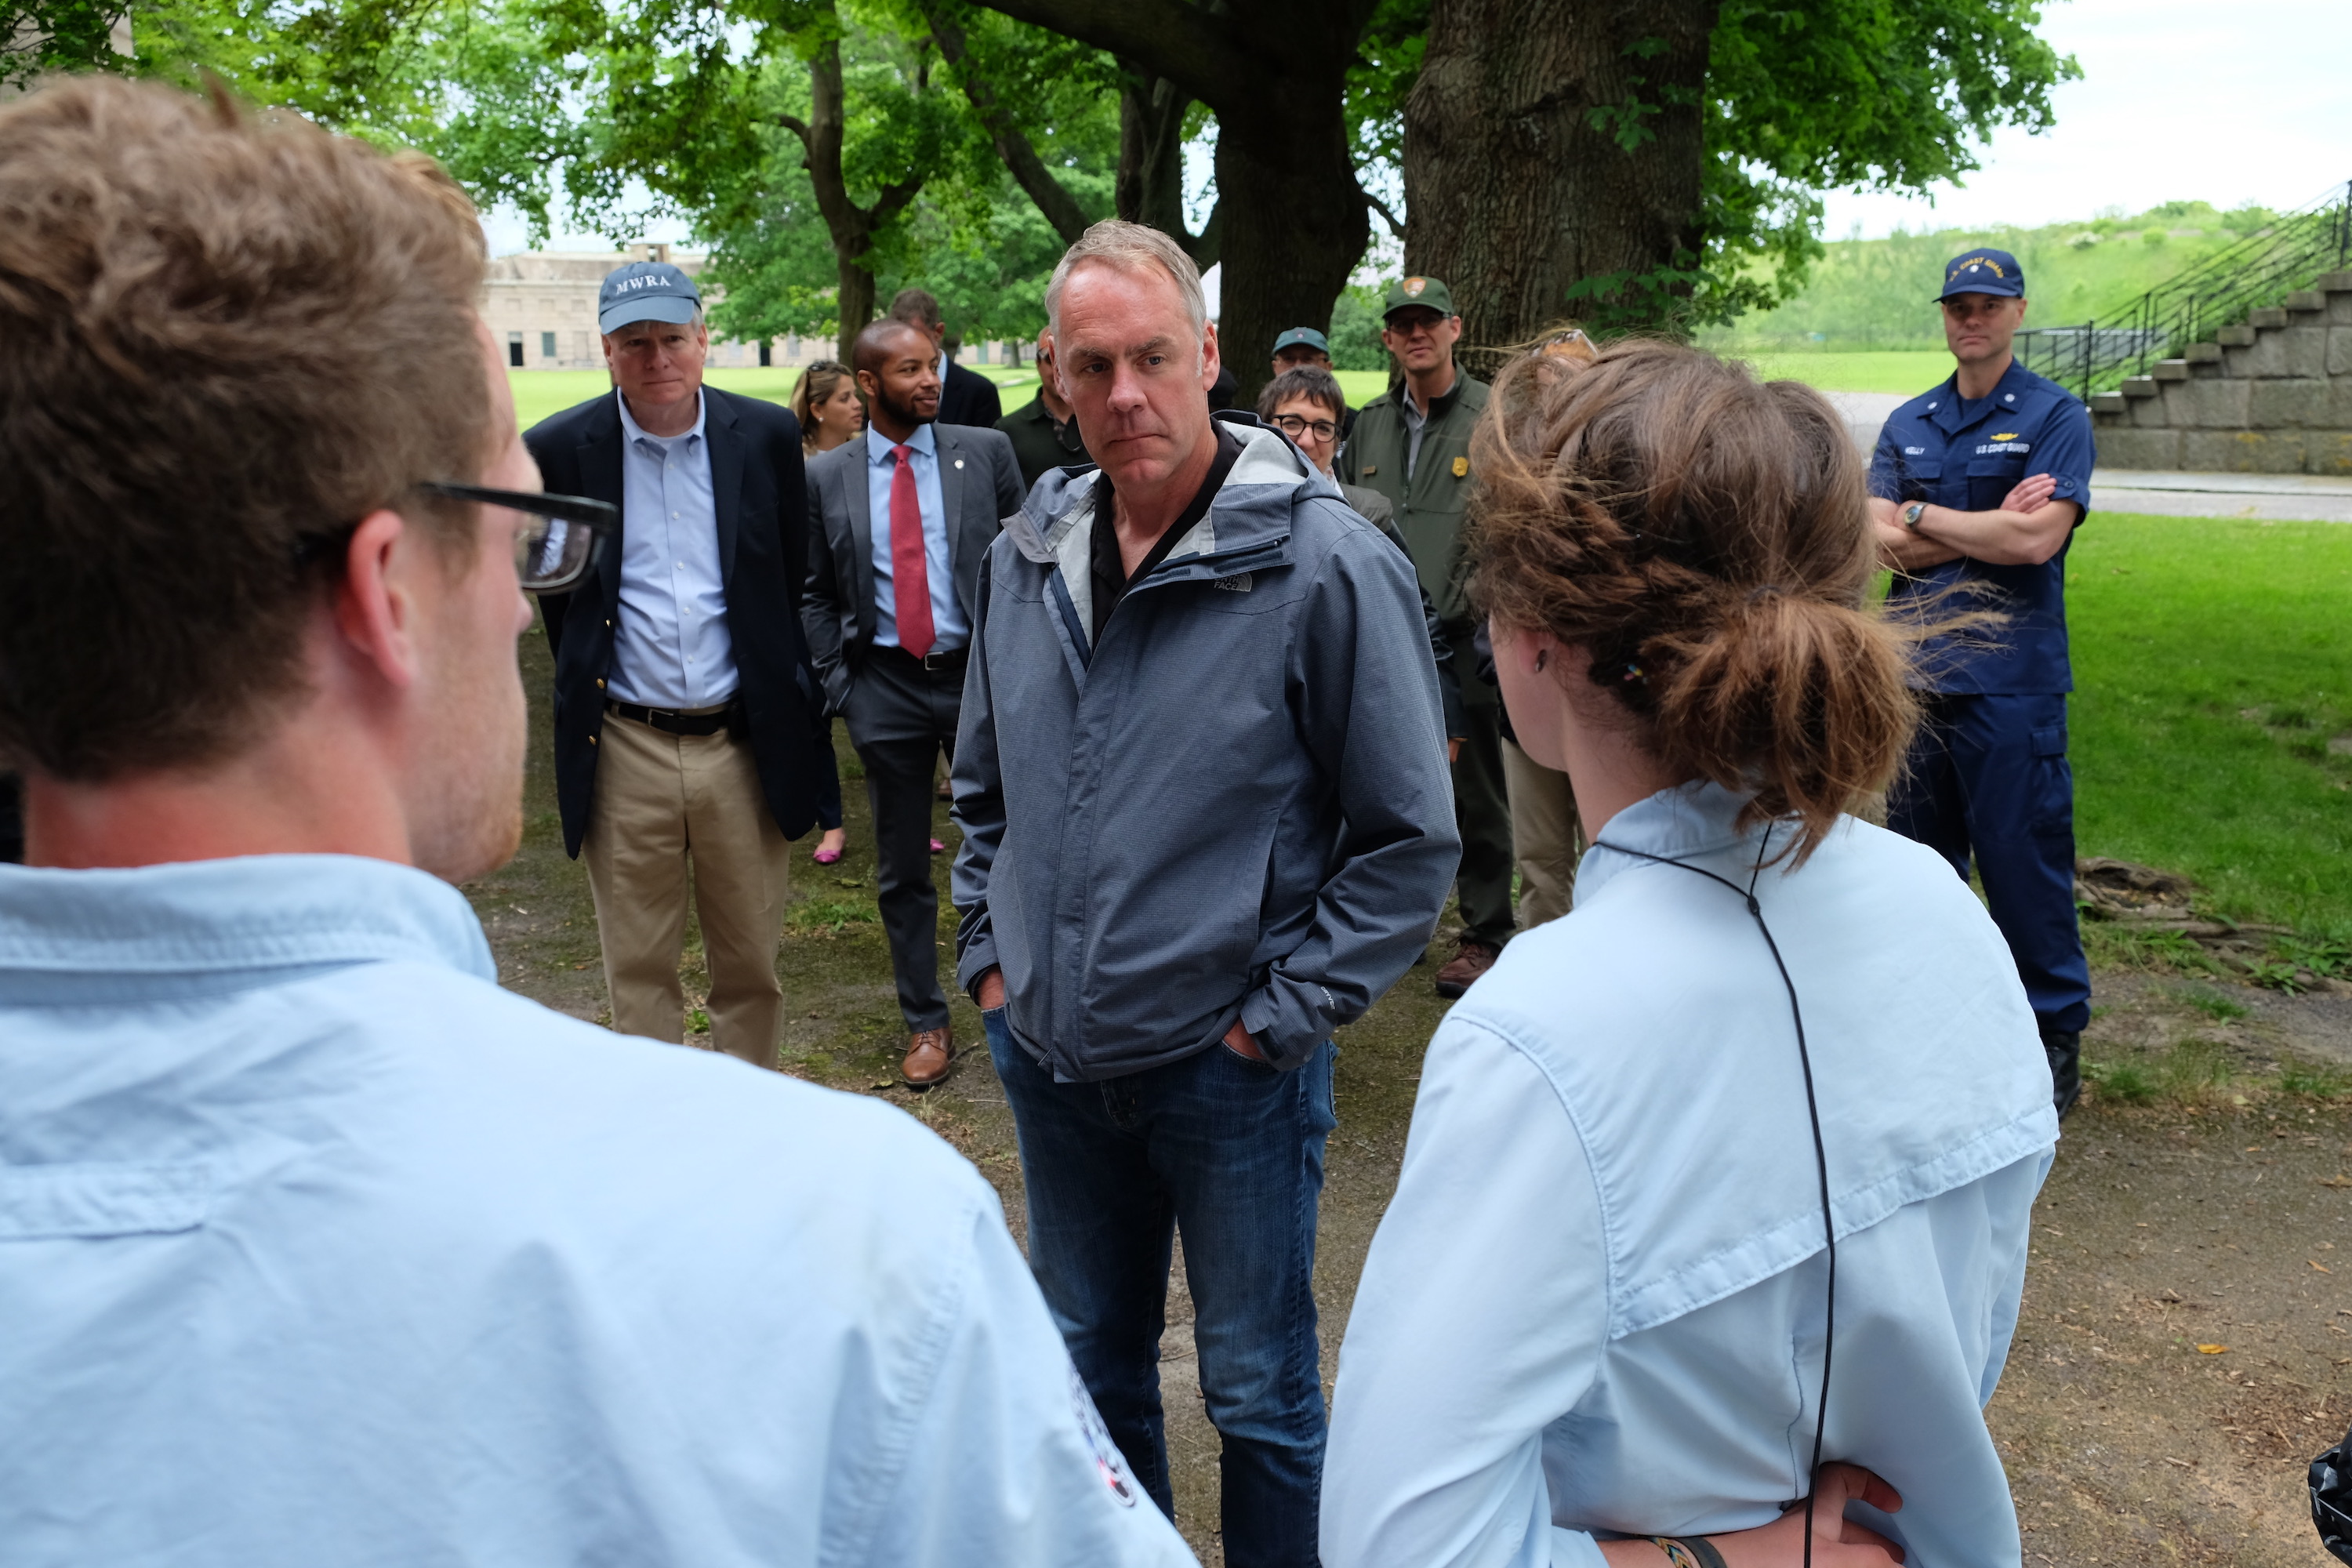 Secretary Zinke complains about long waits for approvals at Interior